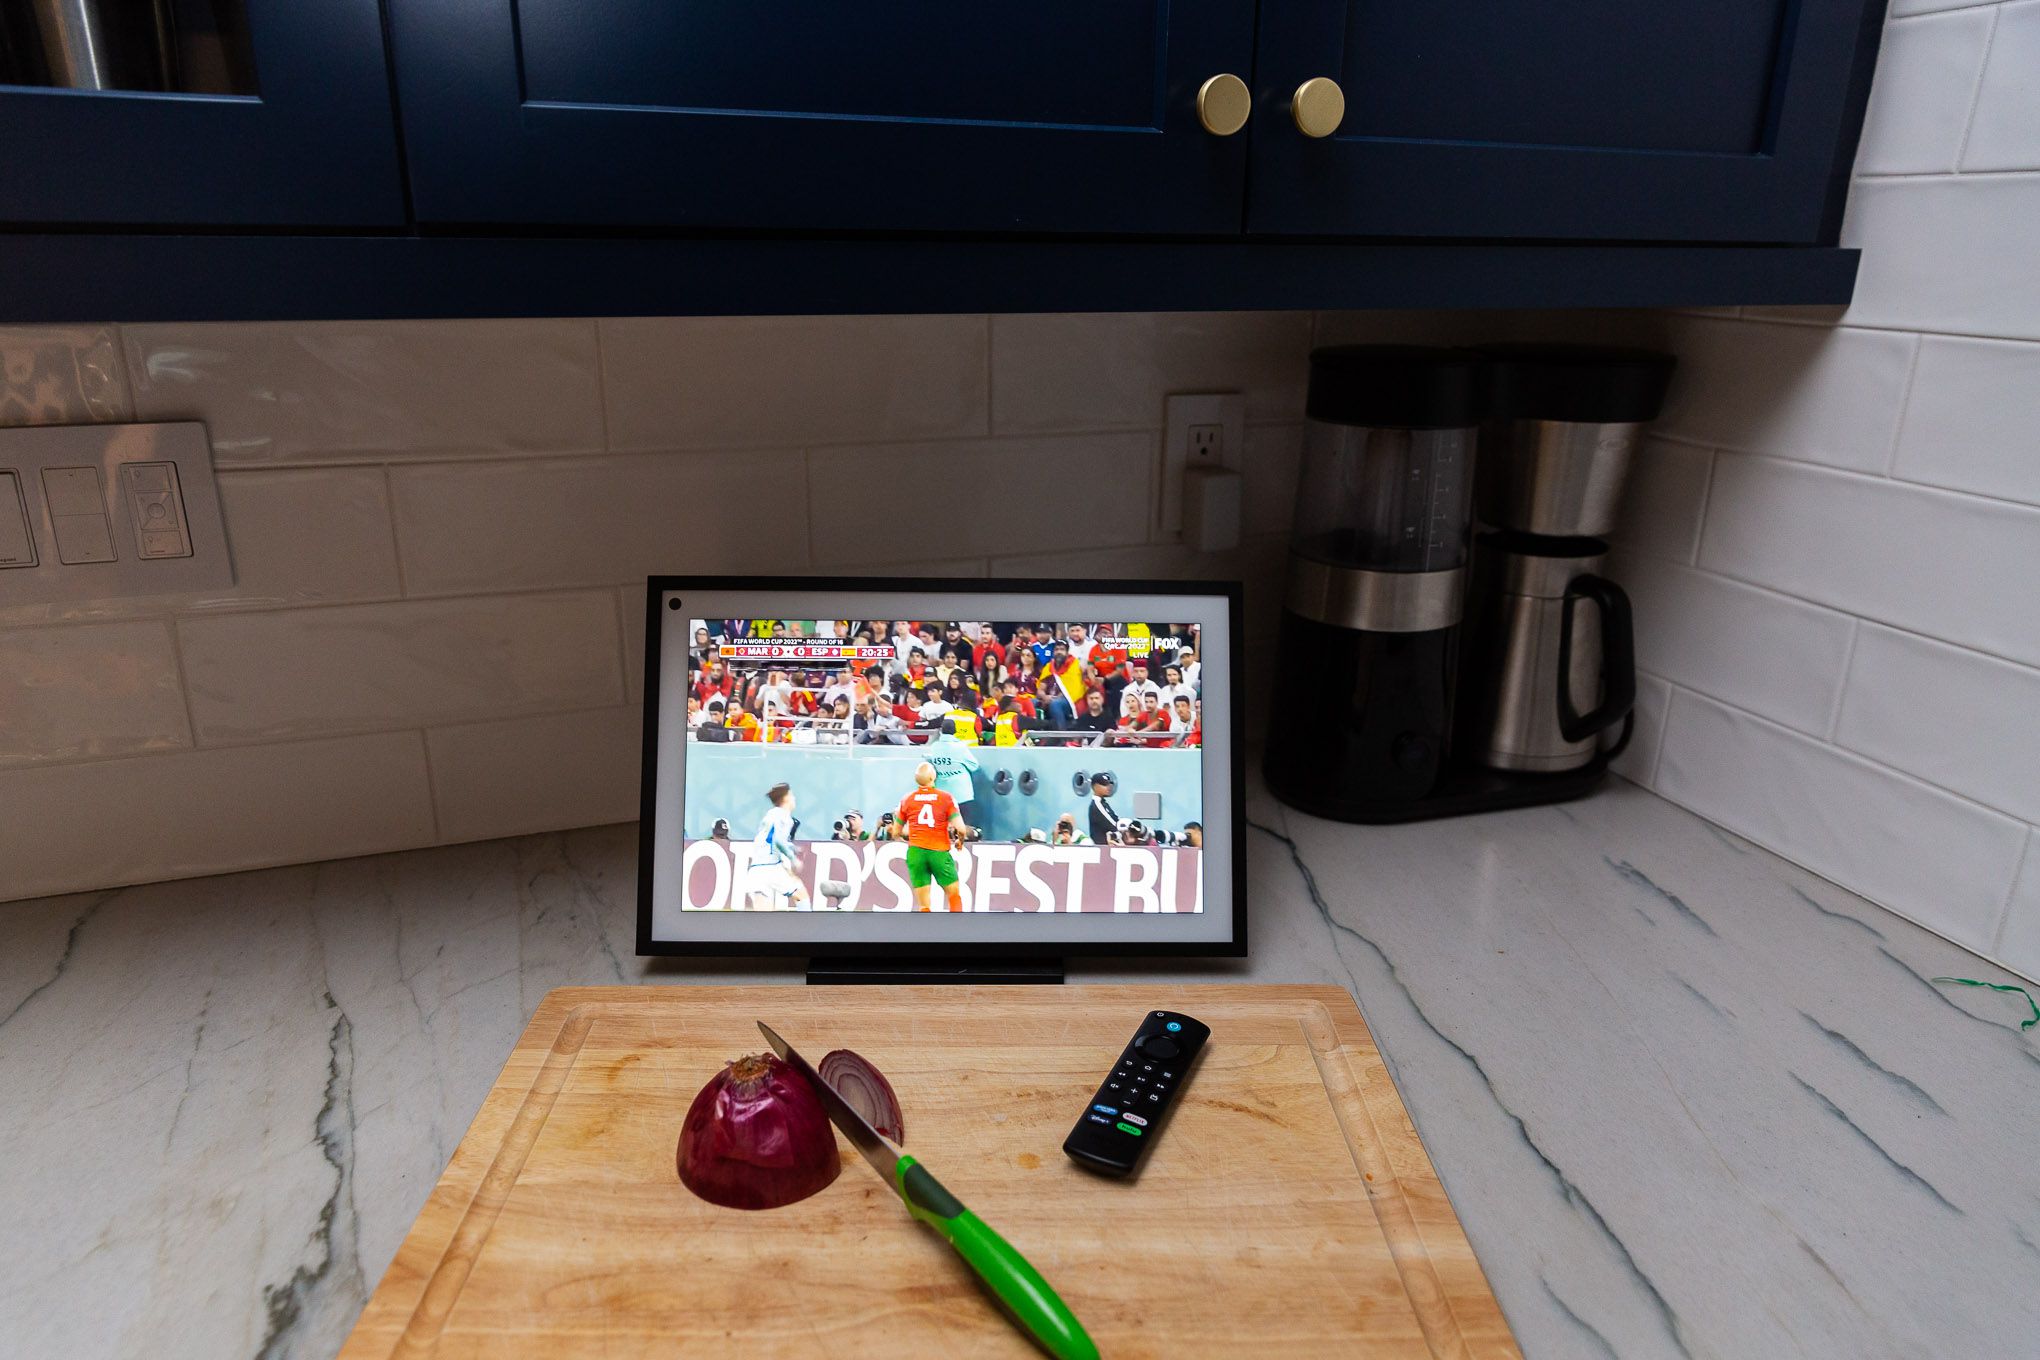 Using a tilt stand (sold separately), I was able to watch the World Cup on YouTubeTV while working in the kitchen.